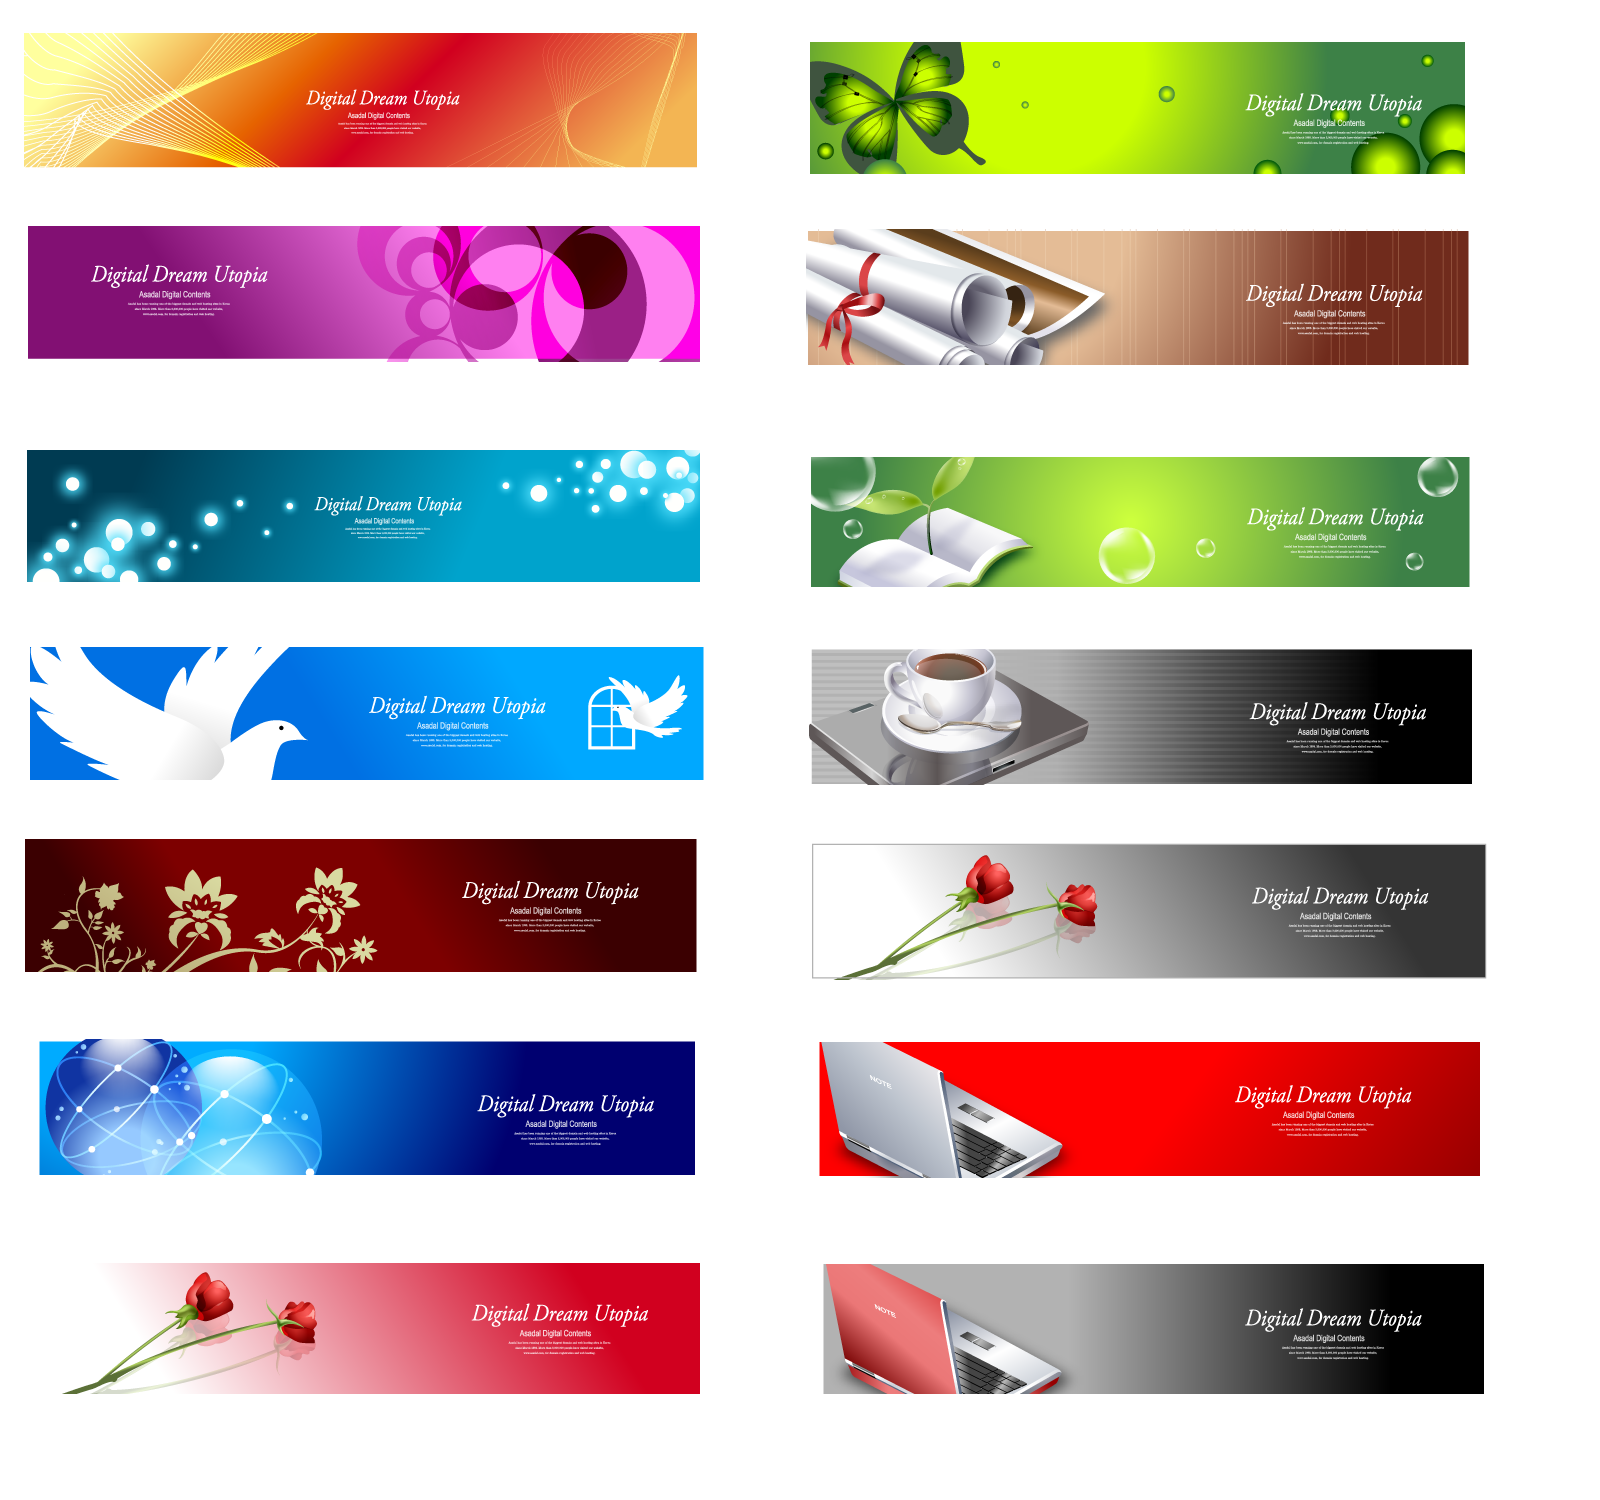 14-website-top-banner-graphics-images-free-banner-vector-graphics